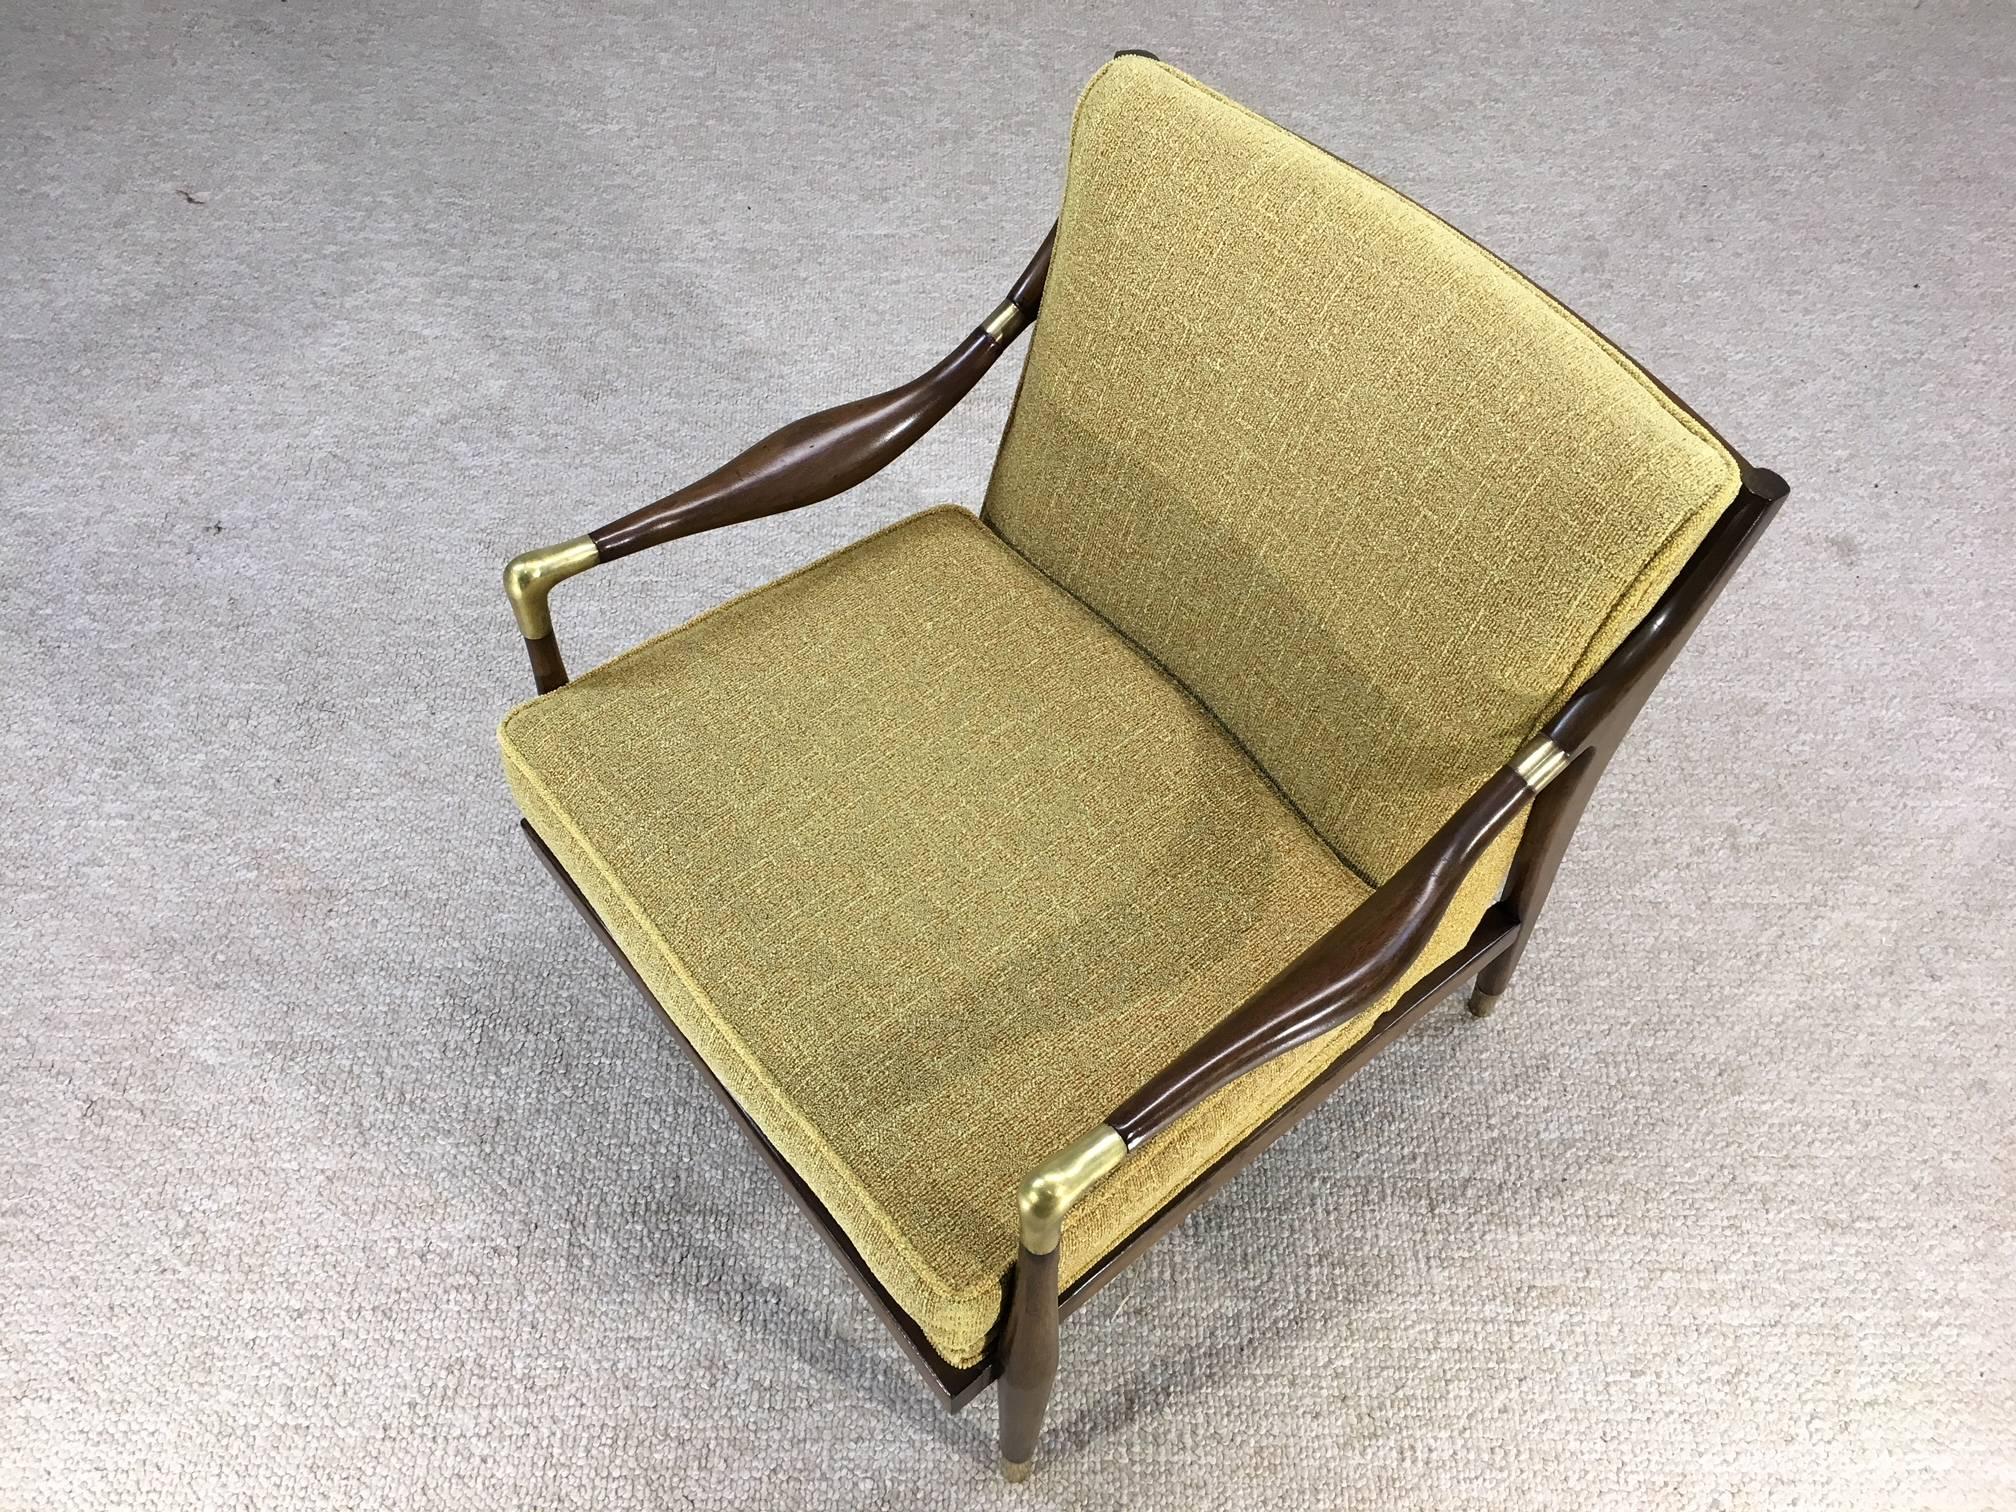 A graceful midcentury open armchair by Jamestown Royal having sculptural walnut arms, brass accents and sabots.
Beautiful condition having original upholstery, circa 1950.

Measures: Seat height 17